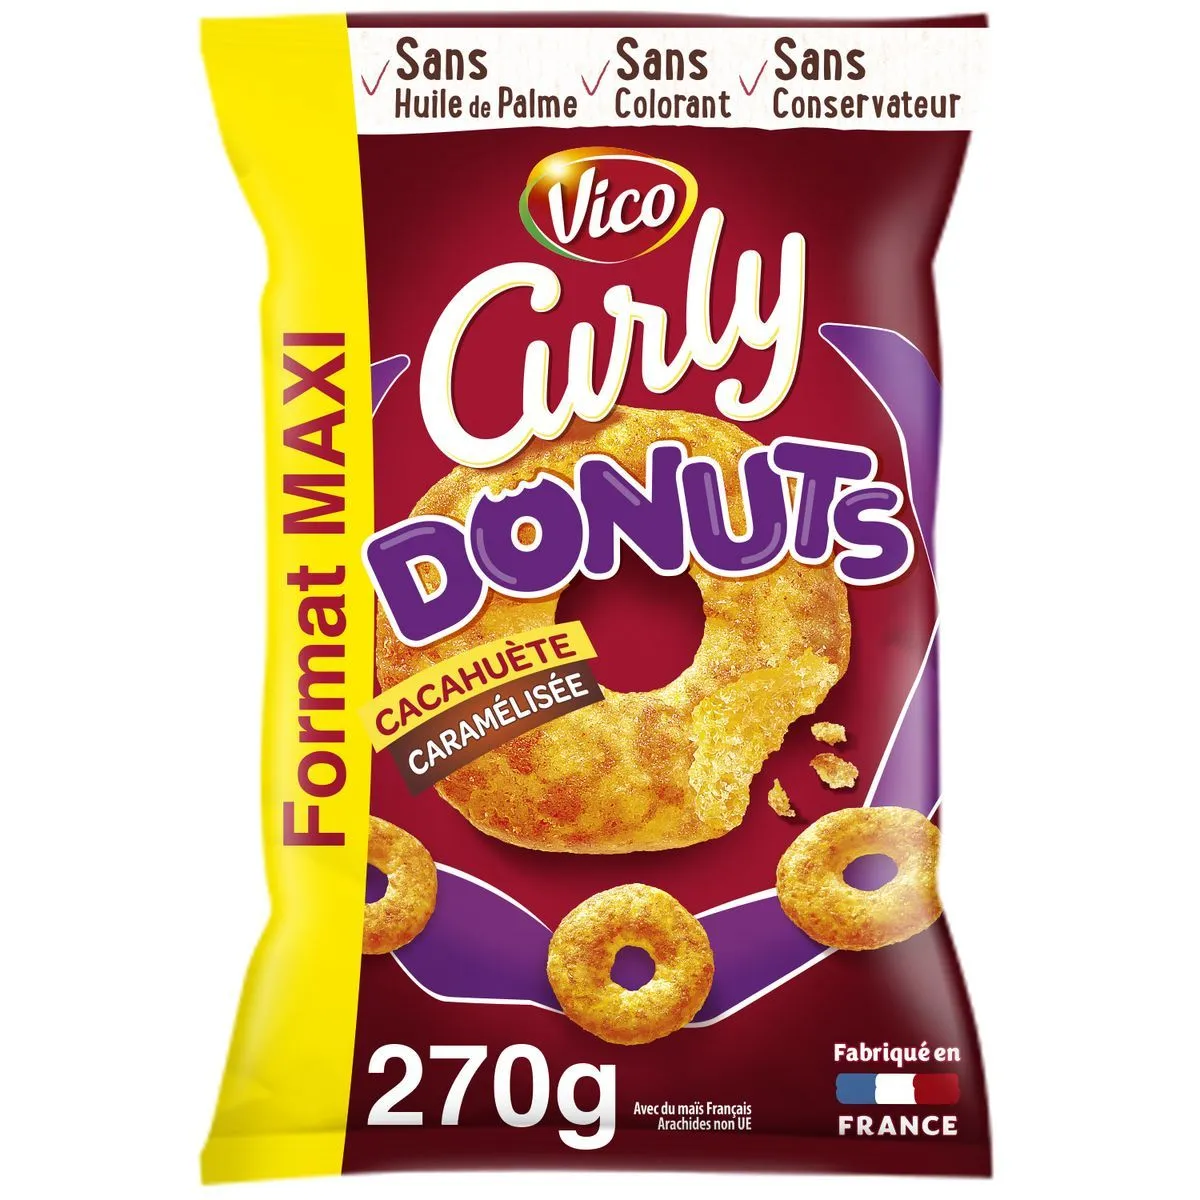 curly donut's cacahuète format maxi vico